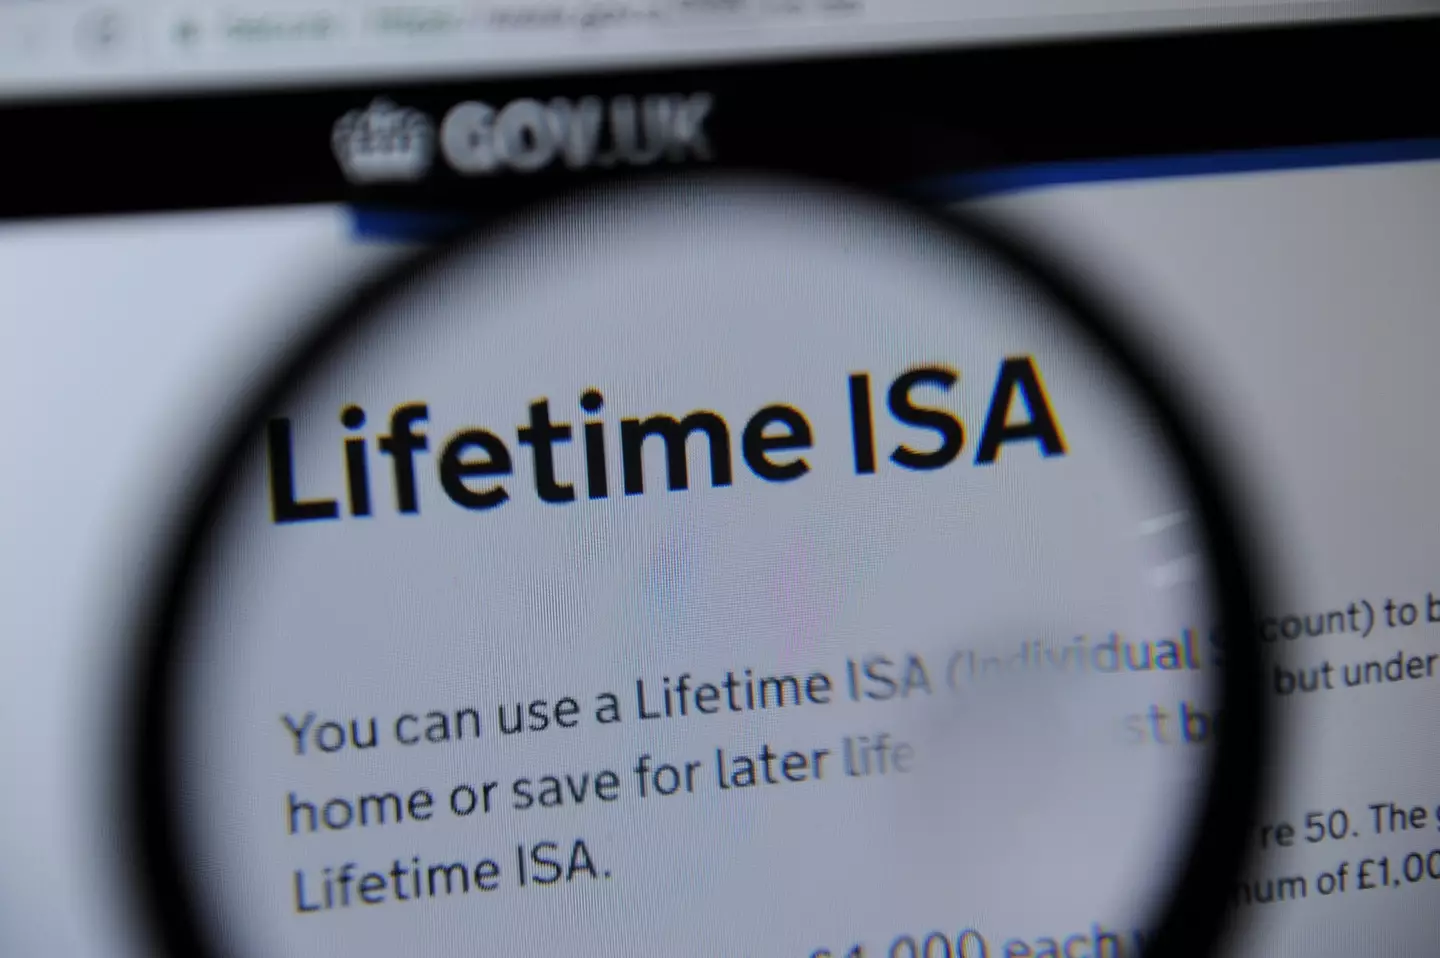 There's only a few days left to sign up for a Lifetime ISA.